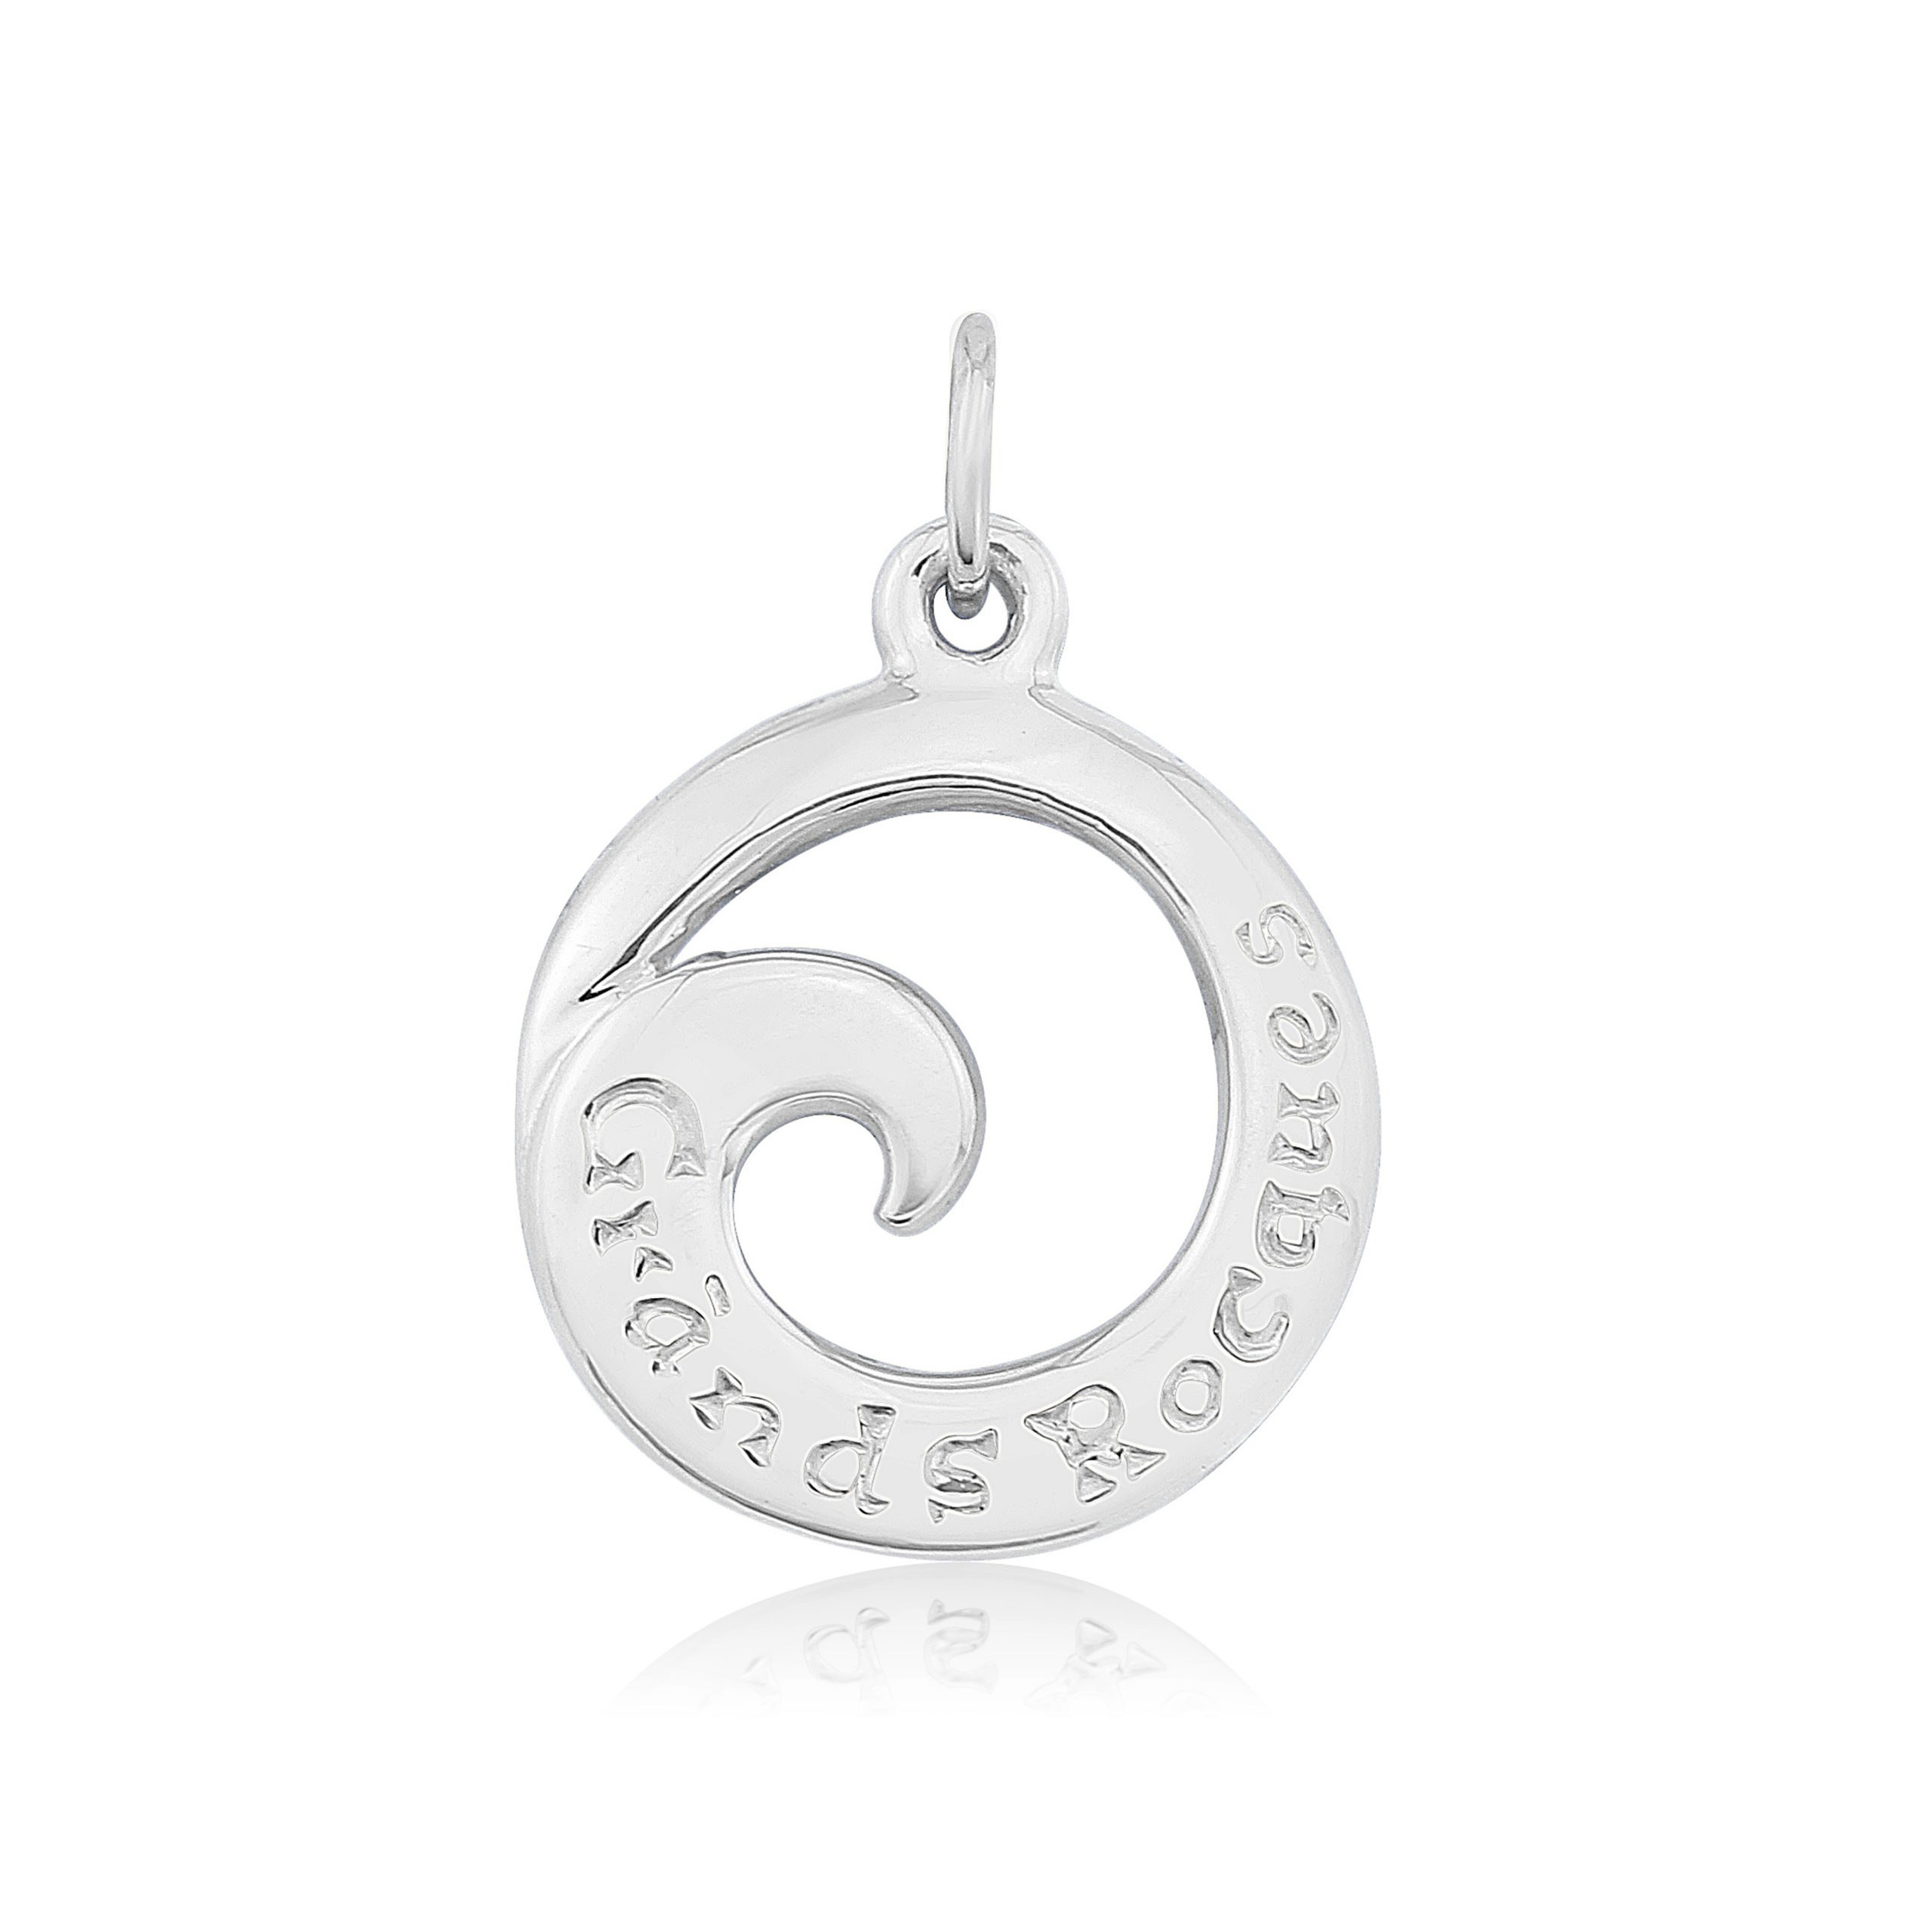 Grands Rocques Sterling Silver Charm / Pendant  (Beach / Bays)